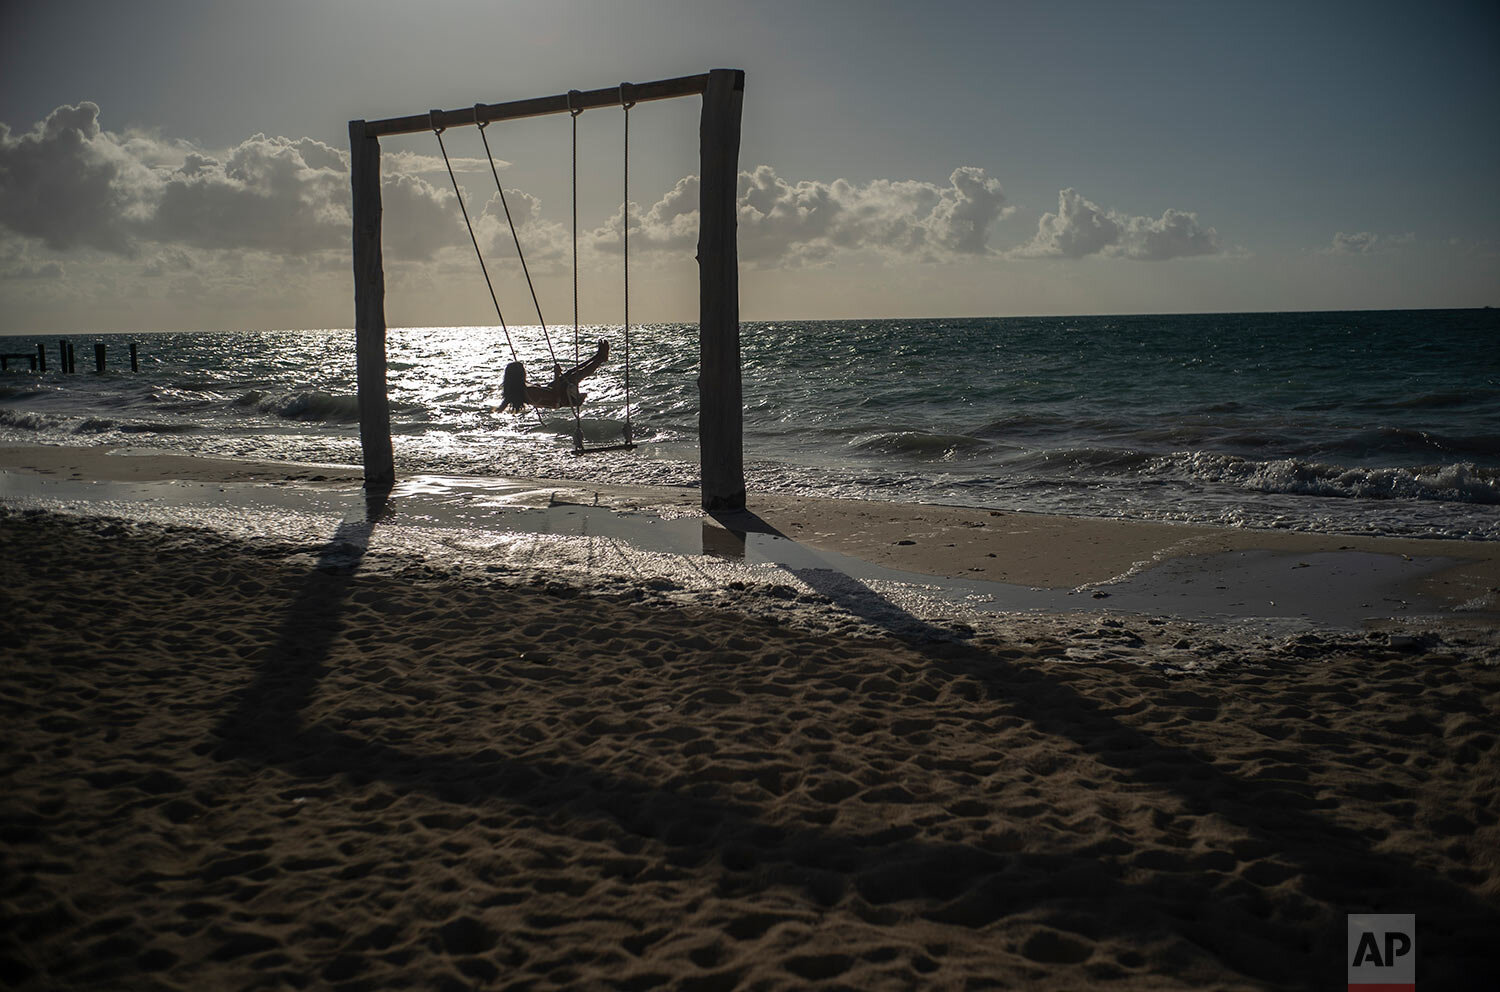  Tourist Loren Fantasia from Baltimore, swings on the beach before the arrival of Hurricane Dorian, in Freeport, Bahamas, Friday, Aug. 30, 2019. Forecasters said the hurricane is expected to keep on strengthening and become a Category 3 later in the 